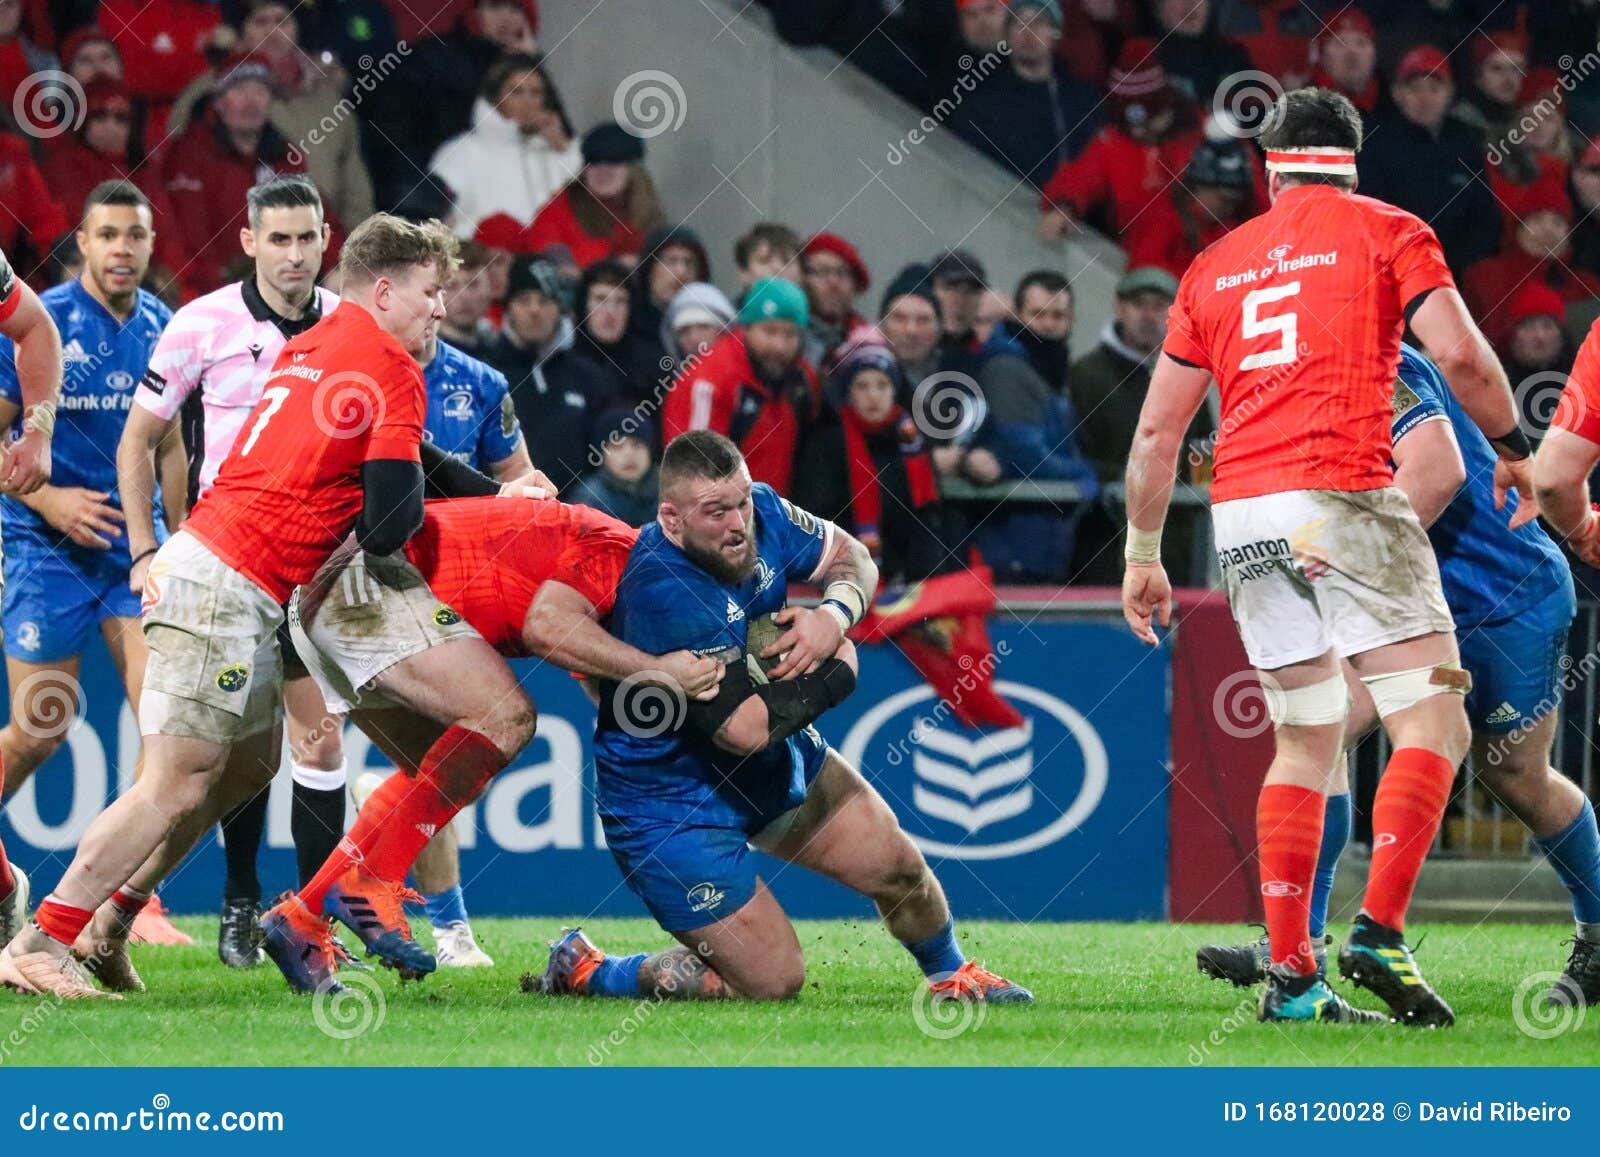 Pro 14 Match - Munster Rugby Versus Leinster Rugby Match at Thomond Park Editorial Stock Photo